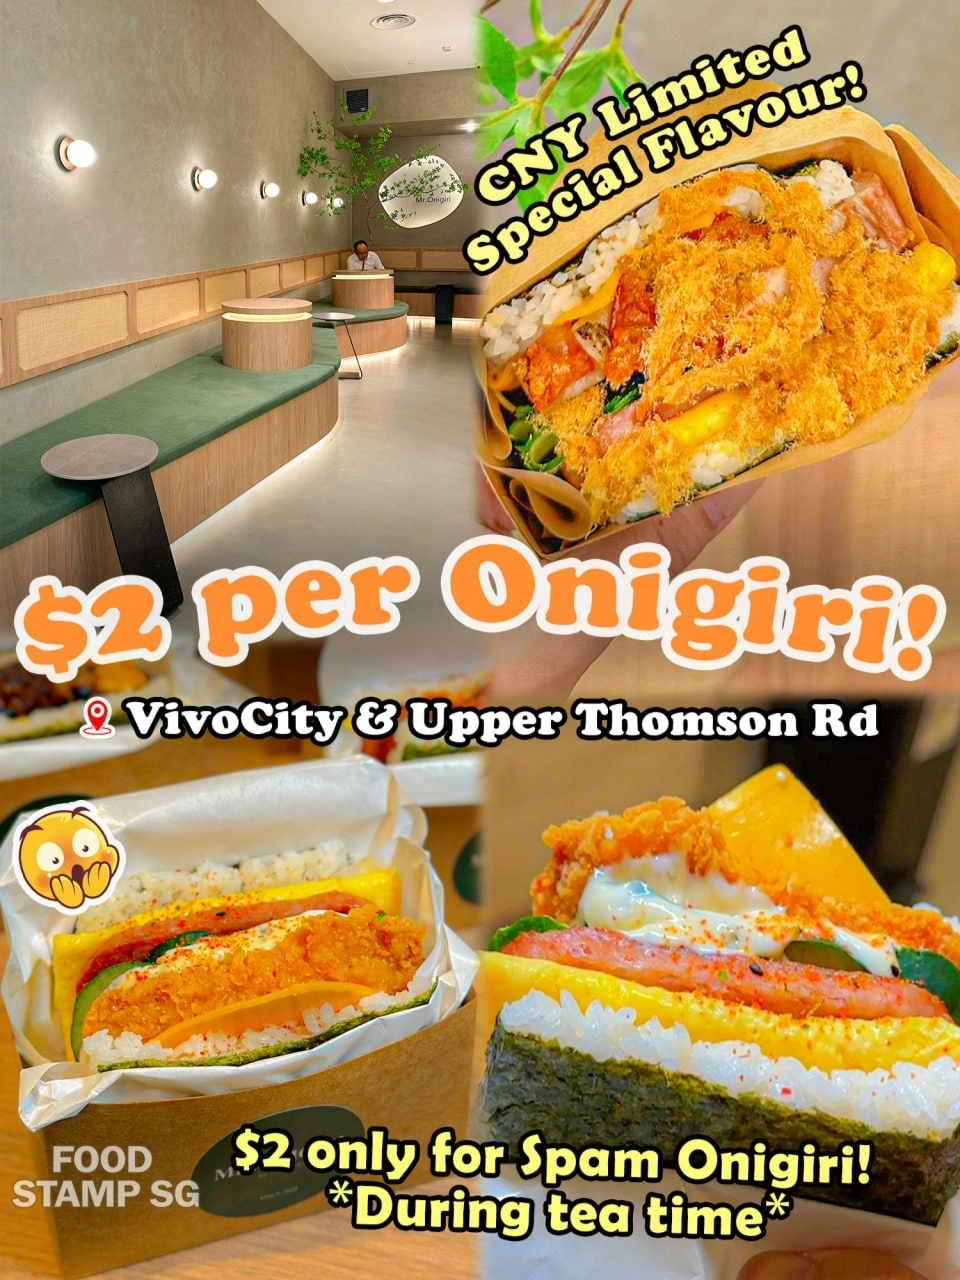 🇸🇬Big Portion Onigiri for only $2 😍‼'s images